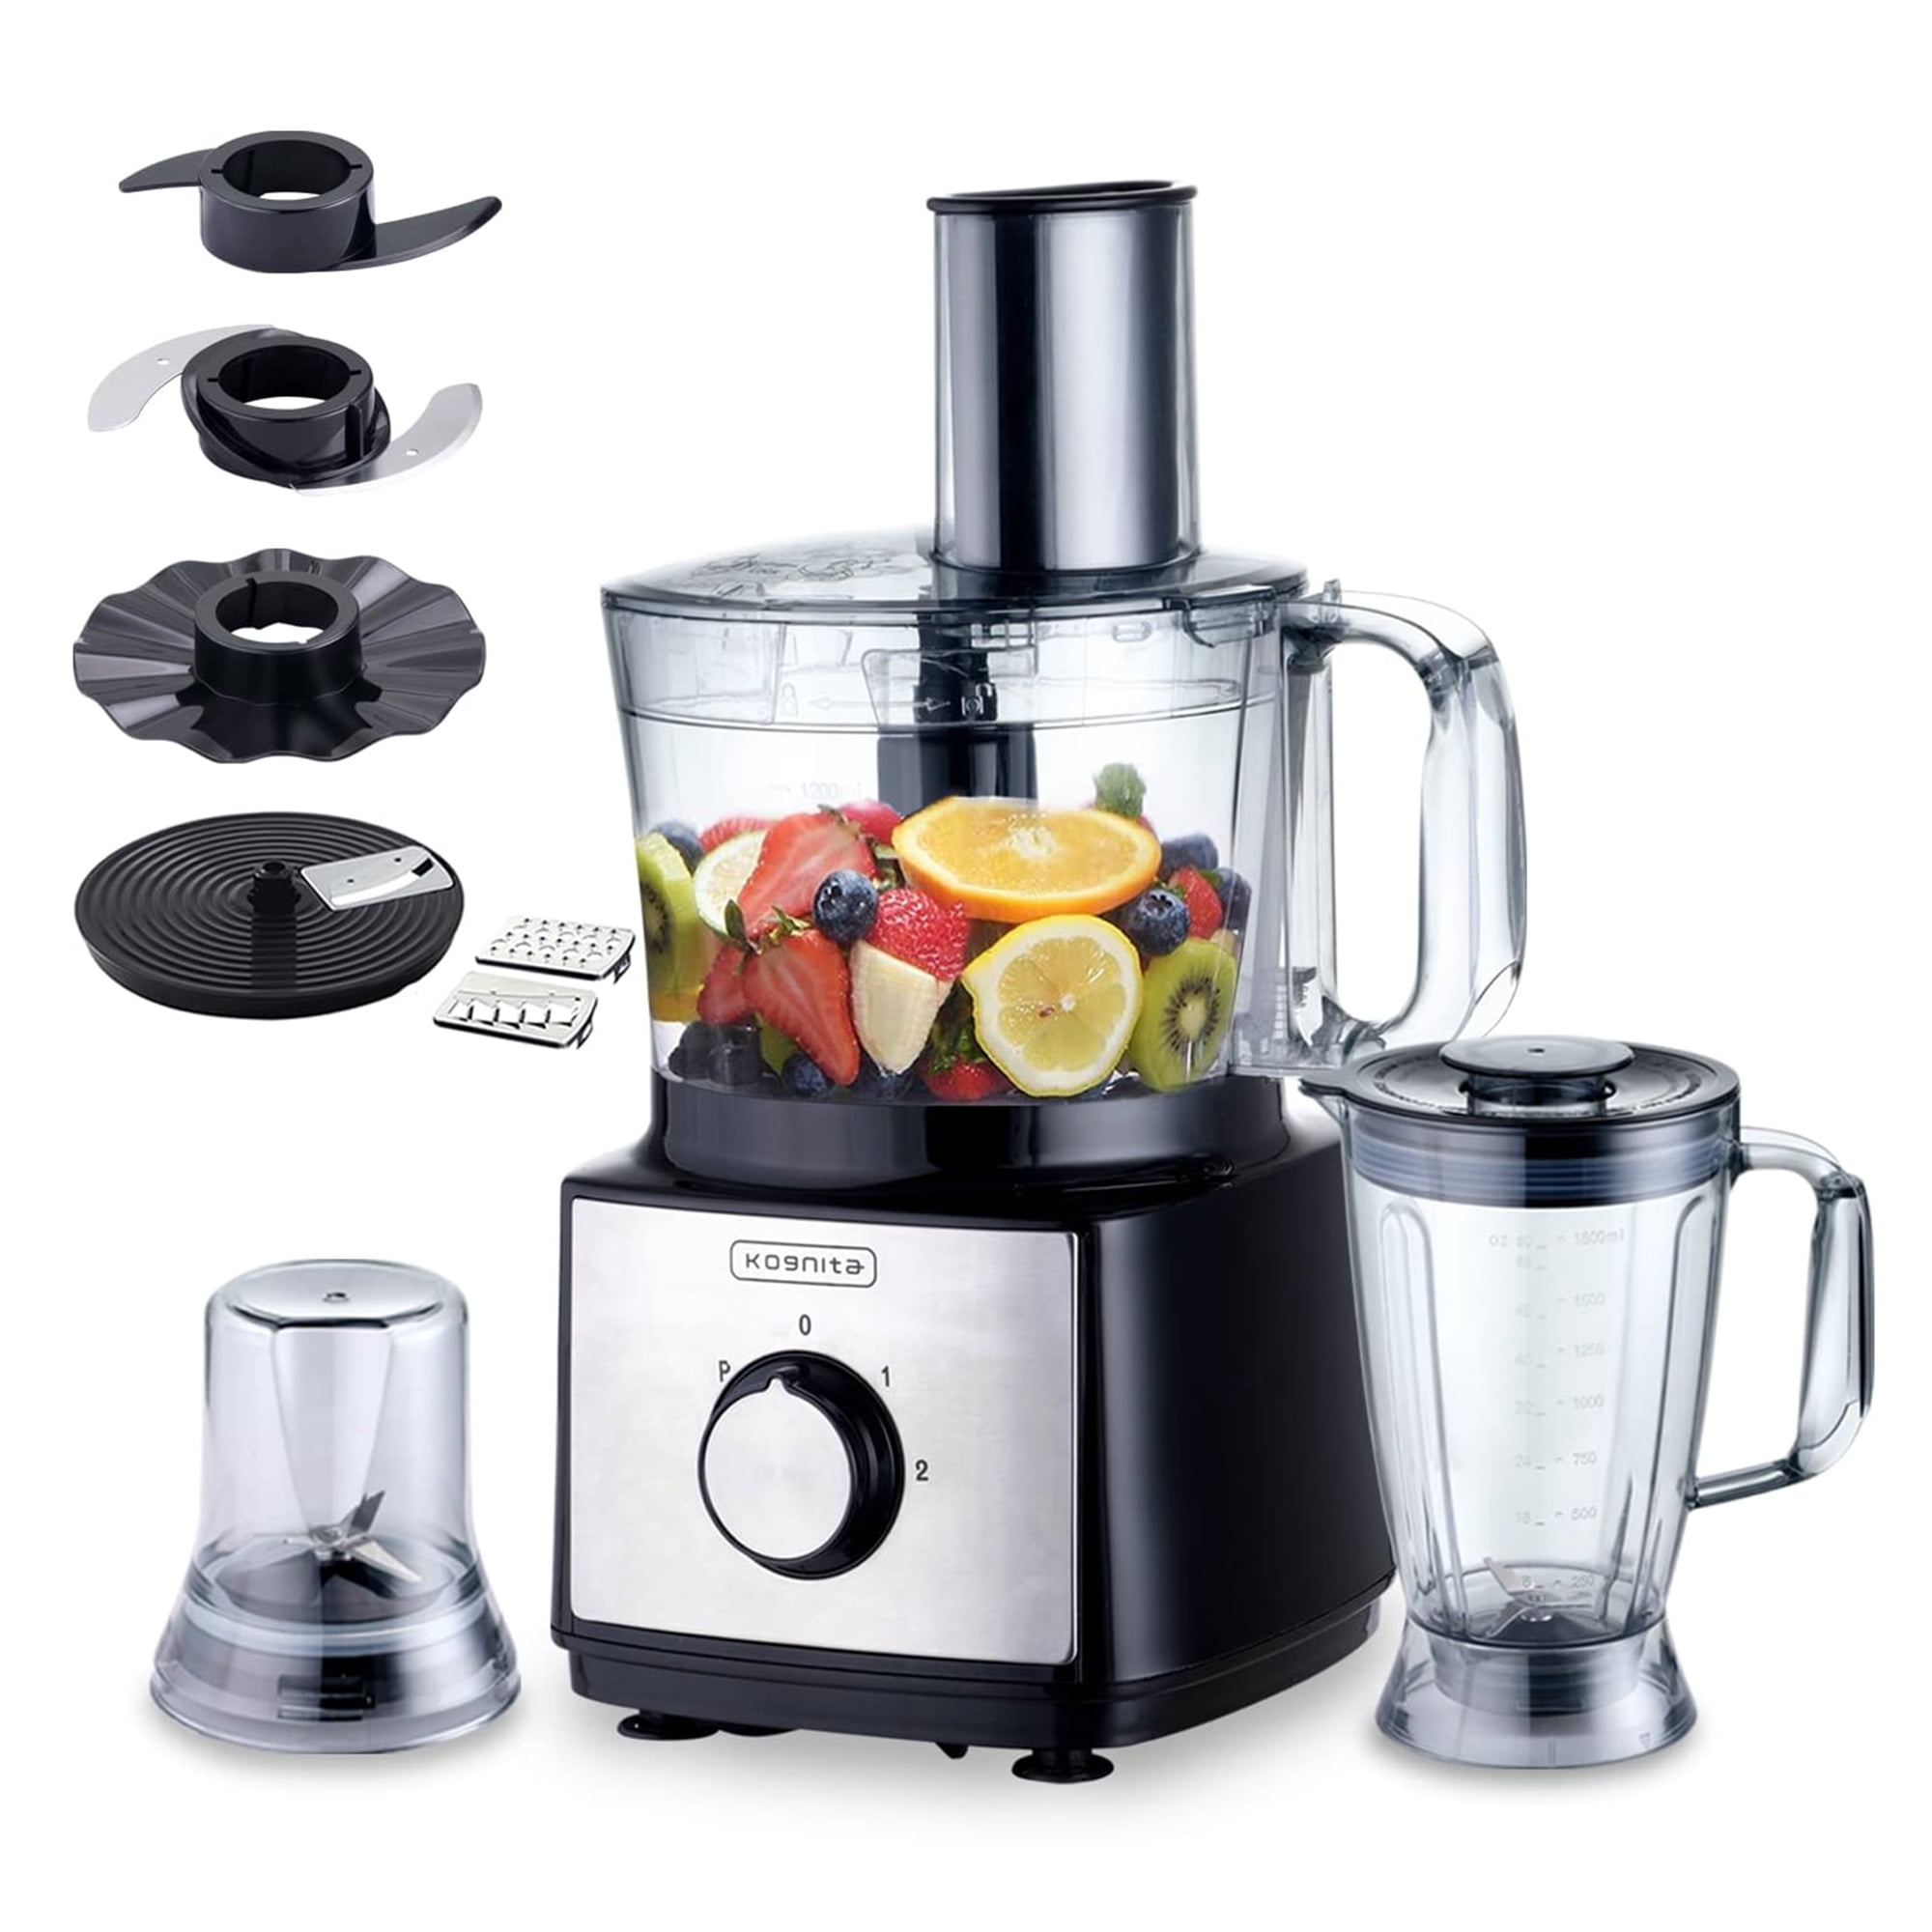 Kognita Food Processor Blender Combo, 8 in 1 Smart Kitchen with Speeds for Chopping,Kneading,Shredding and Slicing, Bowl, Black?Silver - Walmart.com